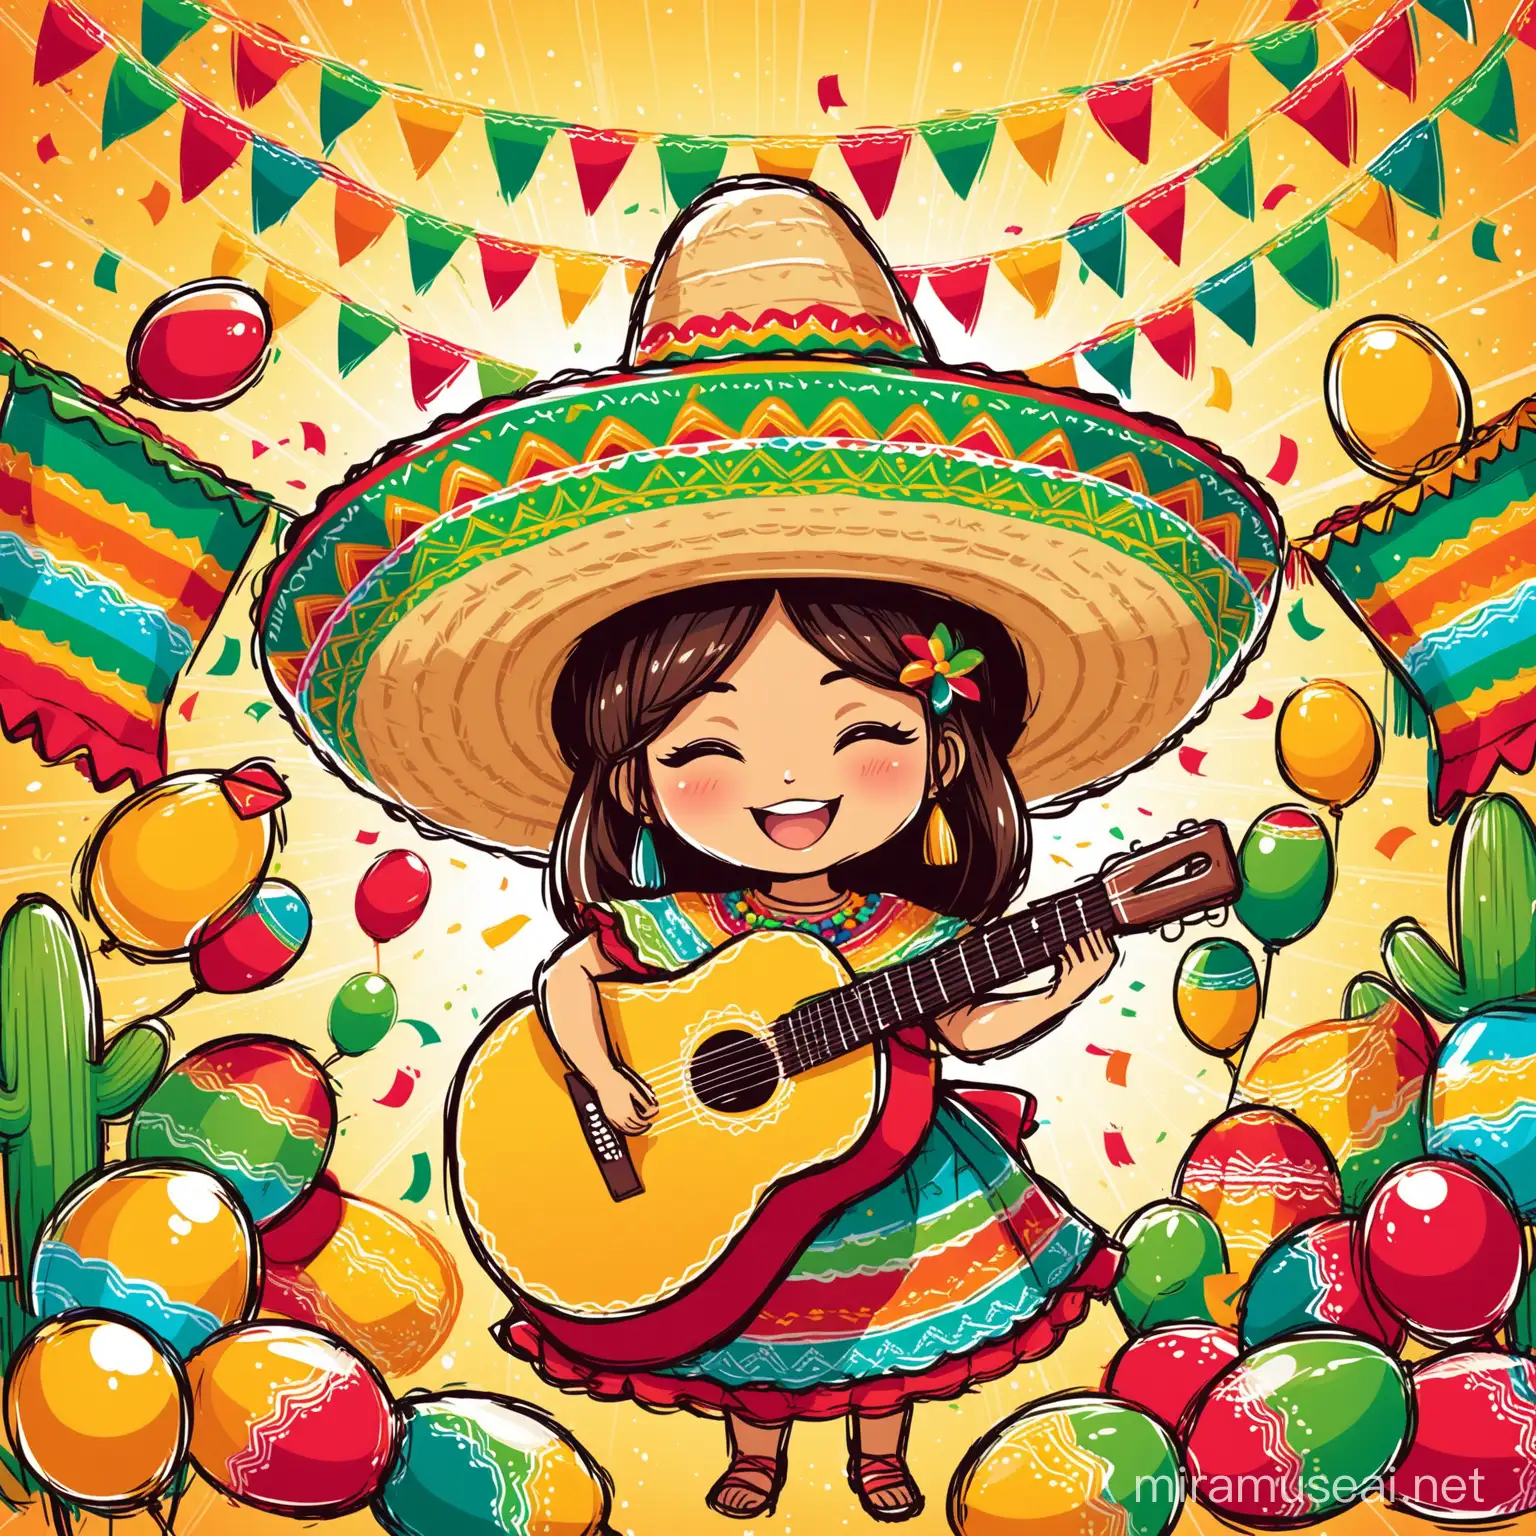 A vibrant and playful illustration of a Cinco de Mayo hat, with vector line art creating a colorful and lively effect. The hat is adorned with various elements such as a sombrero base, mariachi-inspired decorations, and a festive Mexican flag. Accompanying the hat are a lively guitar and a pair of maracas, adding to the celebratory atmosphere. The overall ambiance of the illustration is cheerful and festive, perfect for capturing the spirit of Cinco de Mayo.